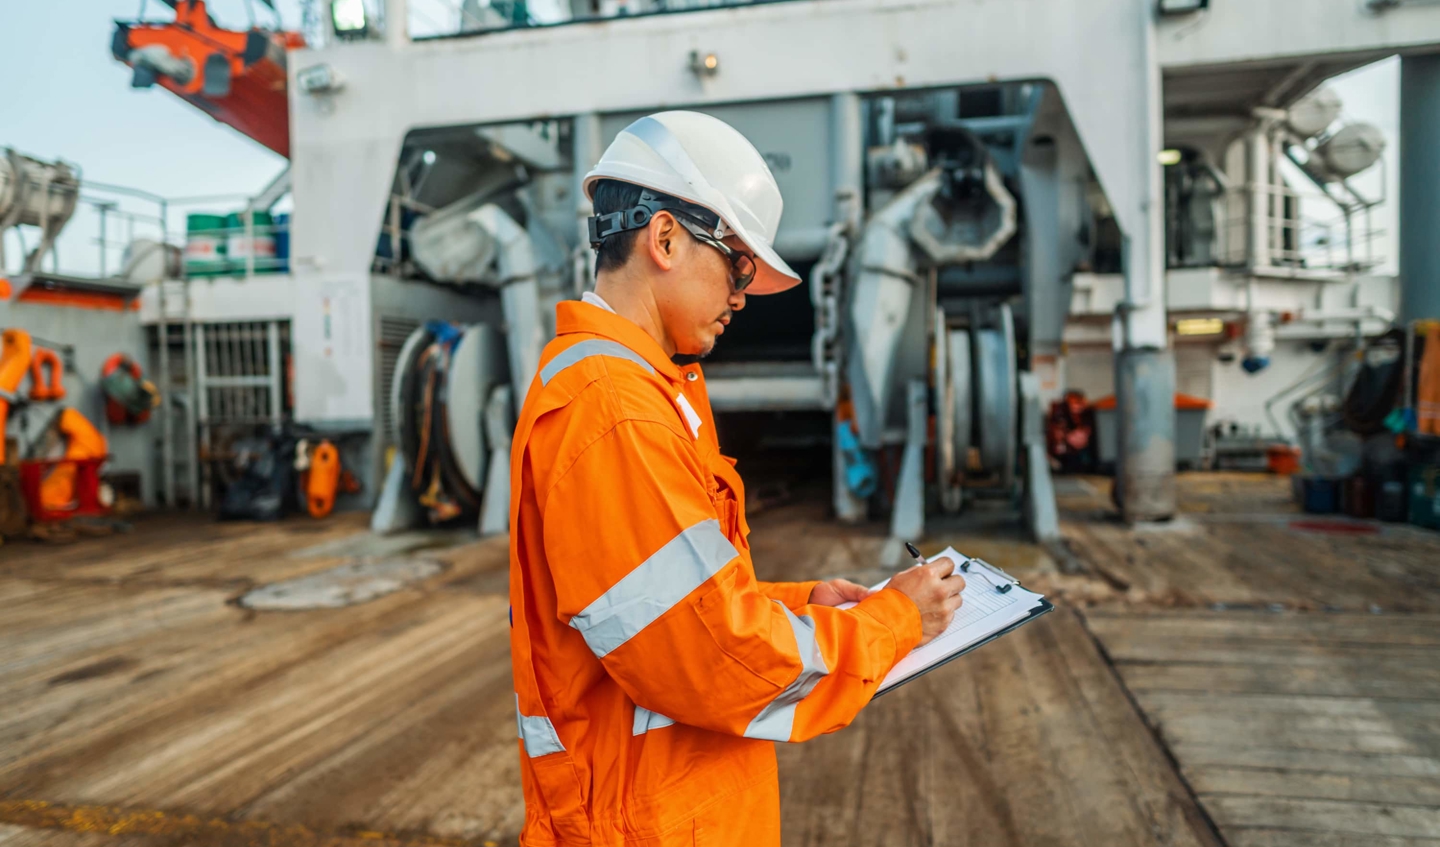 Ship worker in a boilet suit and hardhat looks at a clipboard.